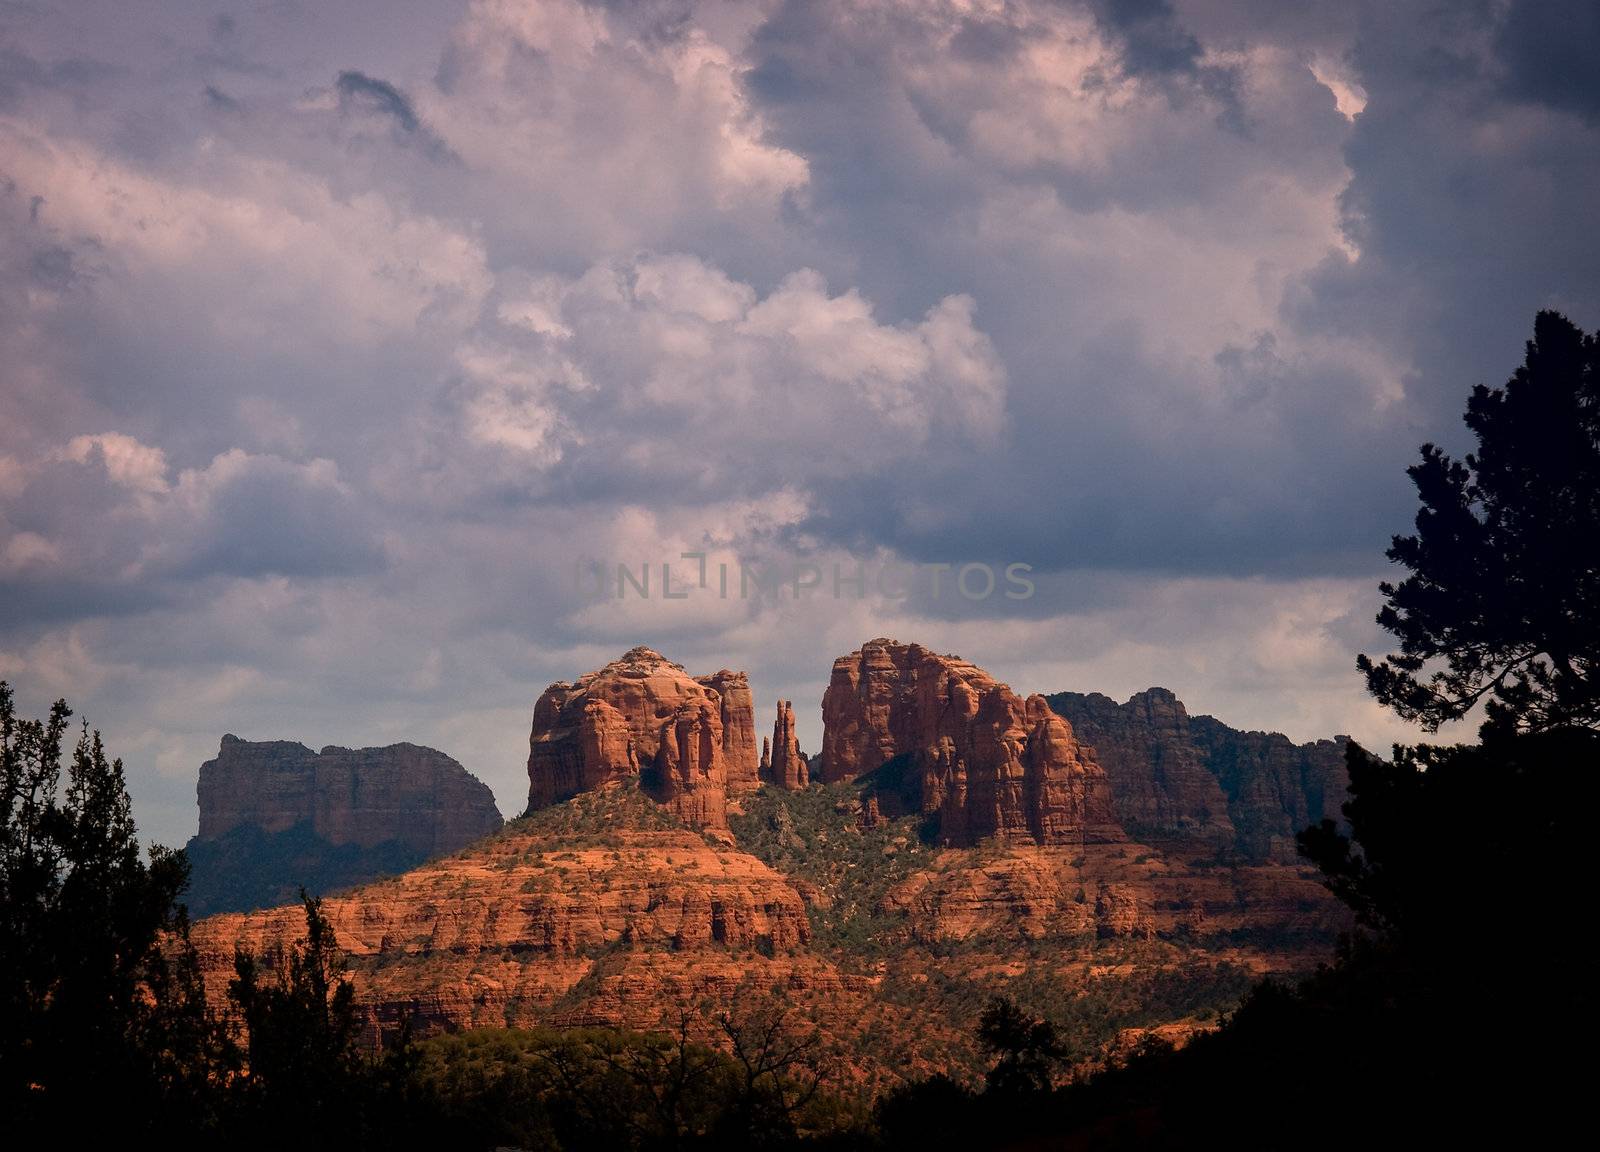 Sedona rocks brilliantly lit by the sun in front of heavy storm clouds